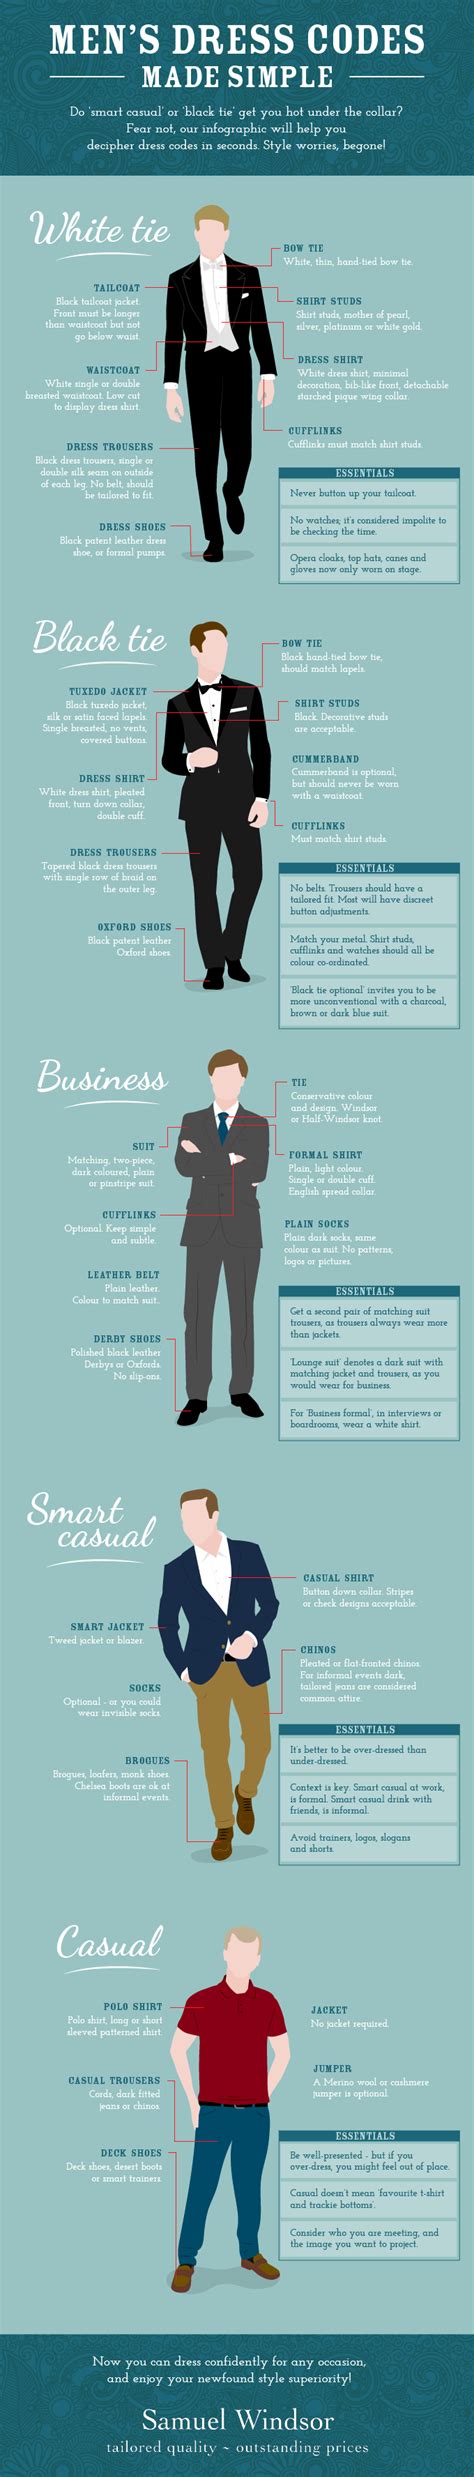 Mens Dress Codes Made Simple In An Infographic